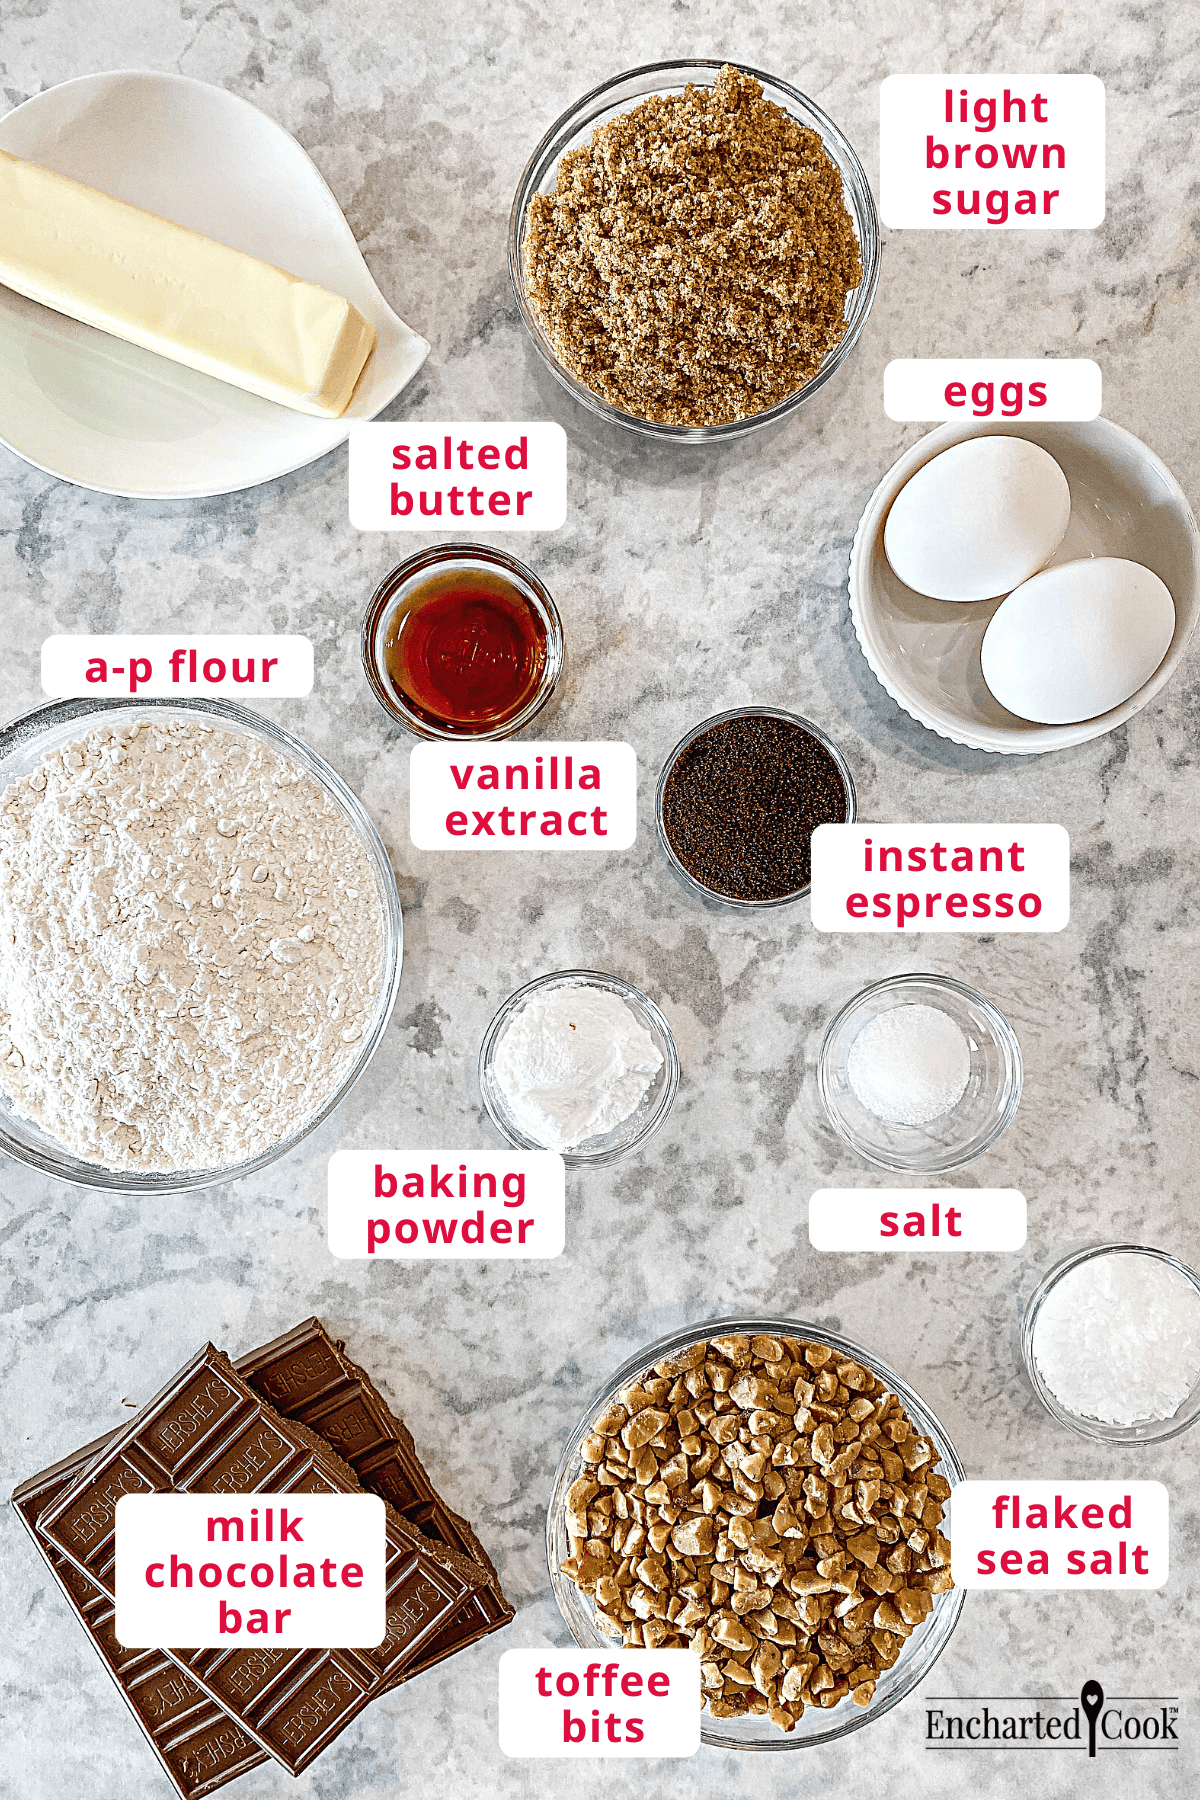 The ingredients, clockwise from top right: light brown sugar, eggs, instant espresso, salt, flaked sea salt, toffee bits, milk chocolate bar, baking powder, a-p flour, vanilla extract, and salted butter.